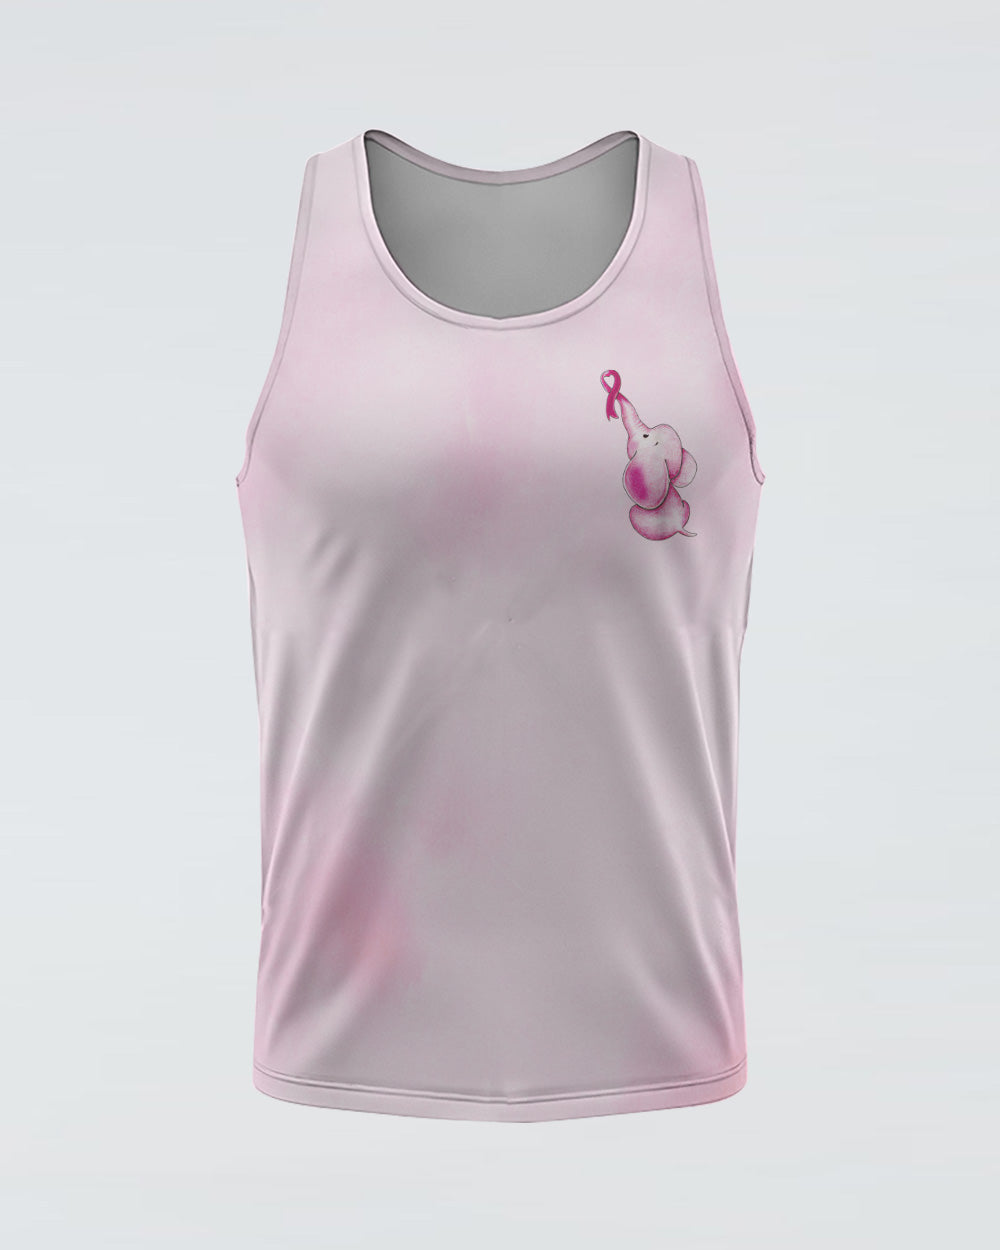 Never Give Up Rose Elephant Women's Breast Cancer Awareness Tanks